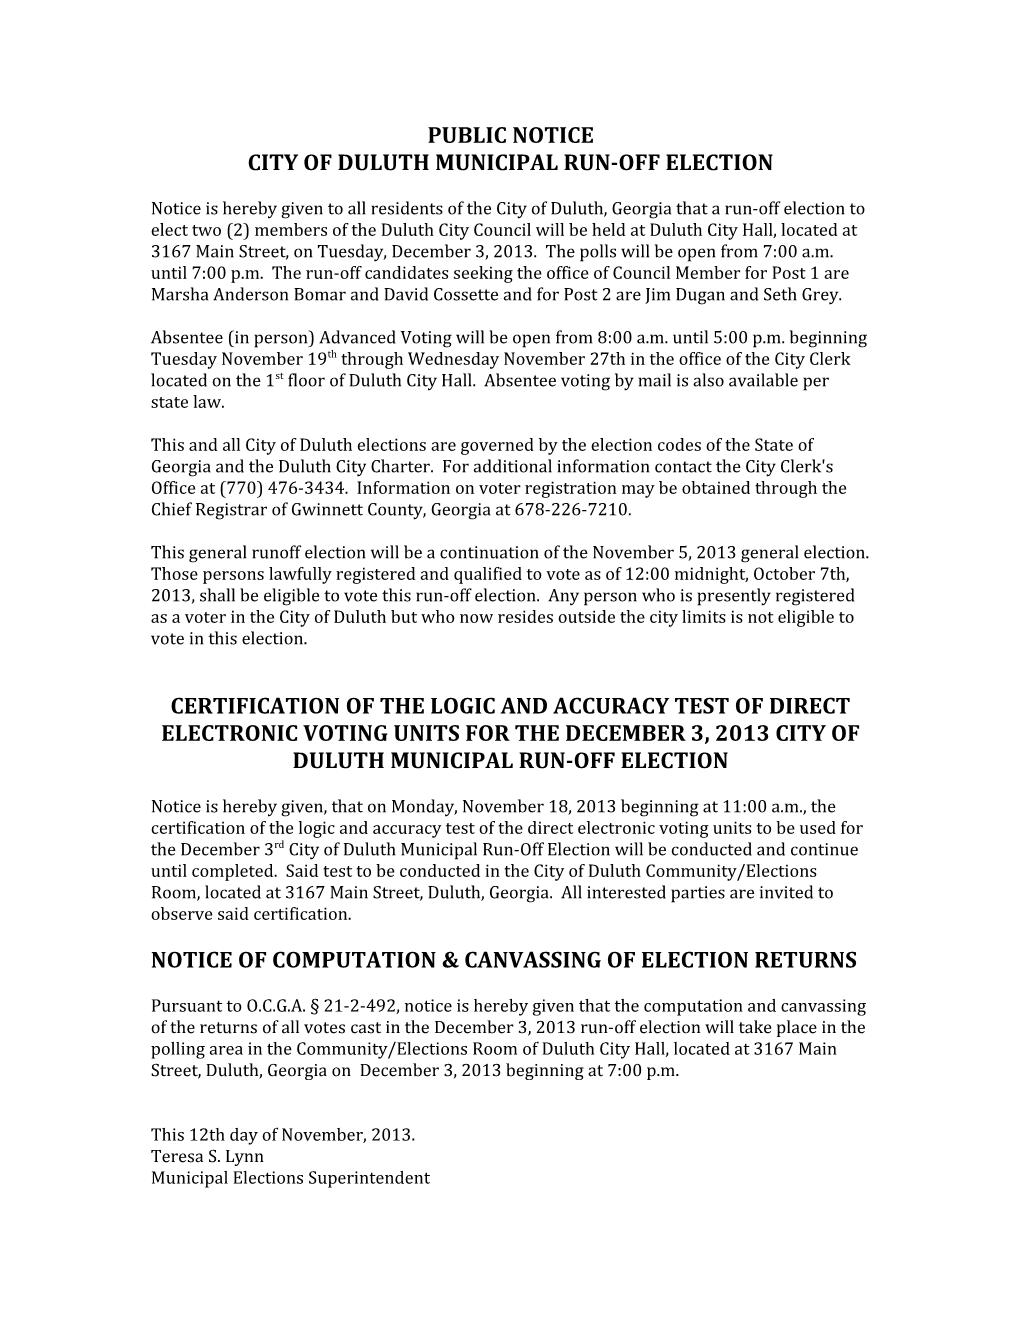 Notice of City of Duluth Municipal Run-Off Election